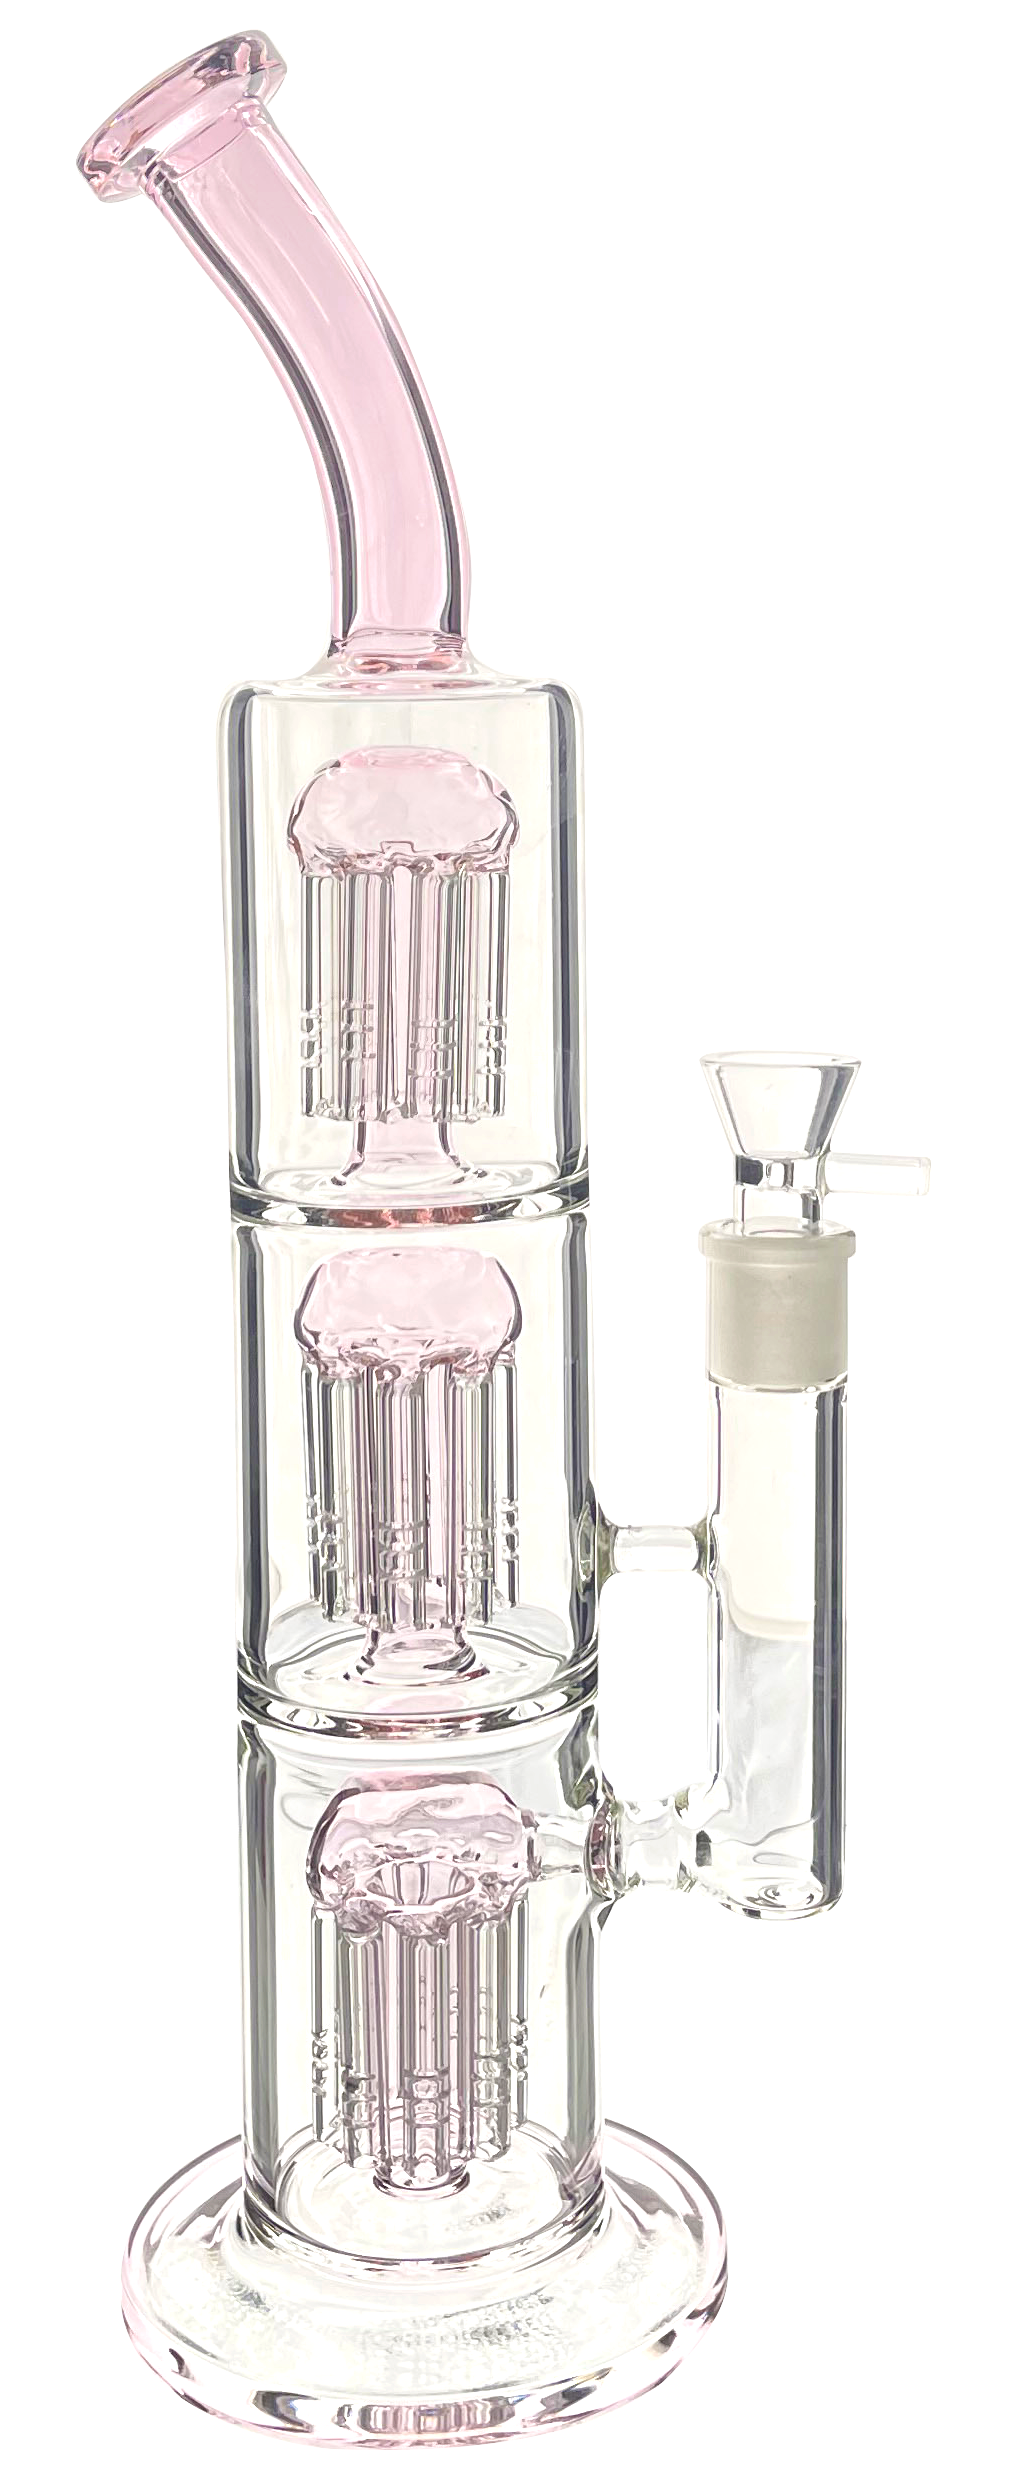 BEND COLOR MOUTHPIECE WITH TRIPLE TREE PERC - Limitless Puff